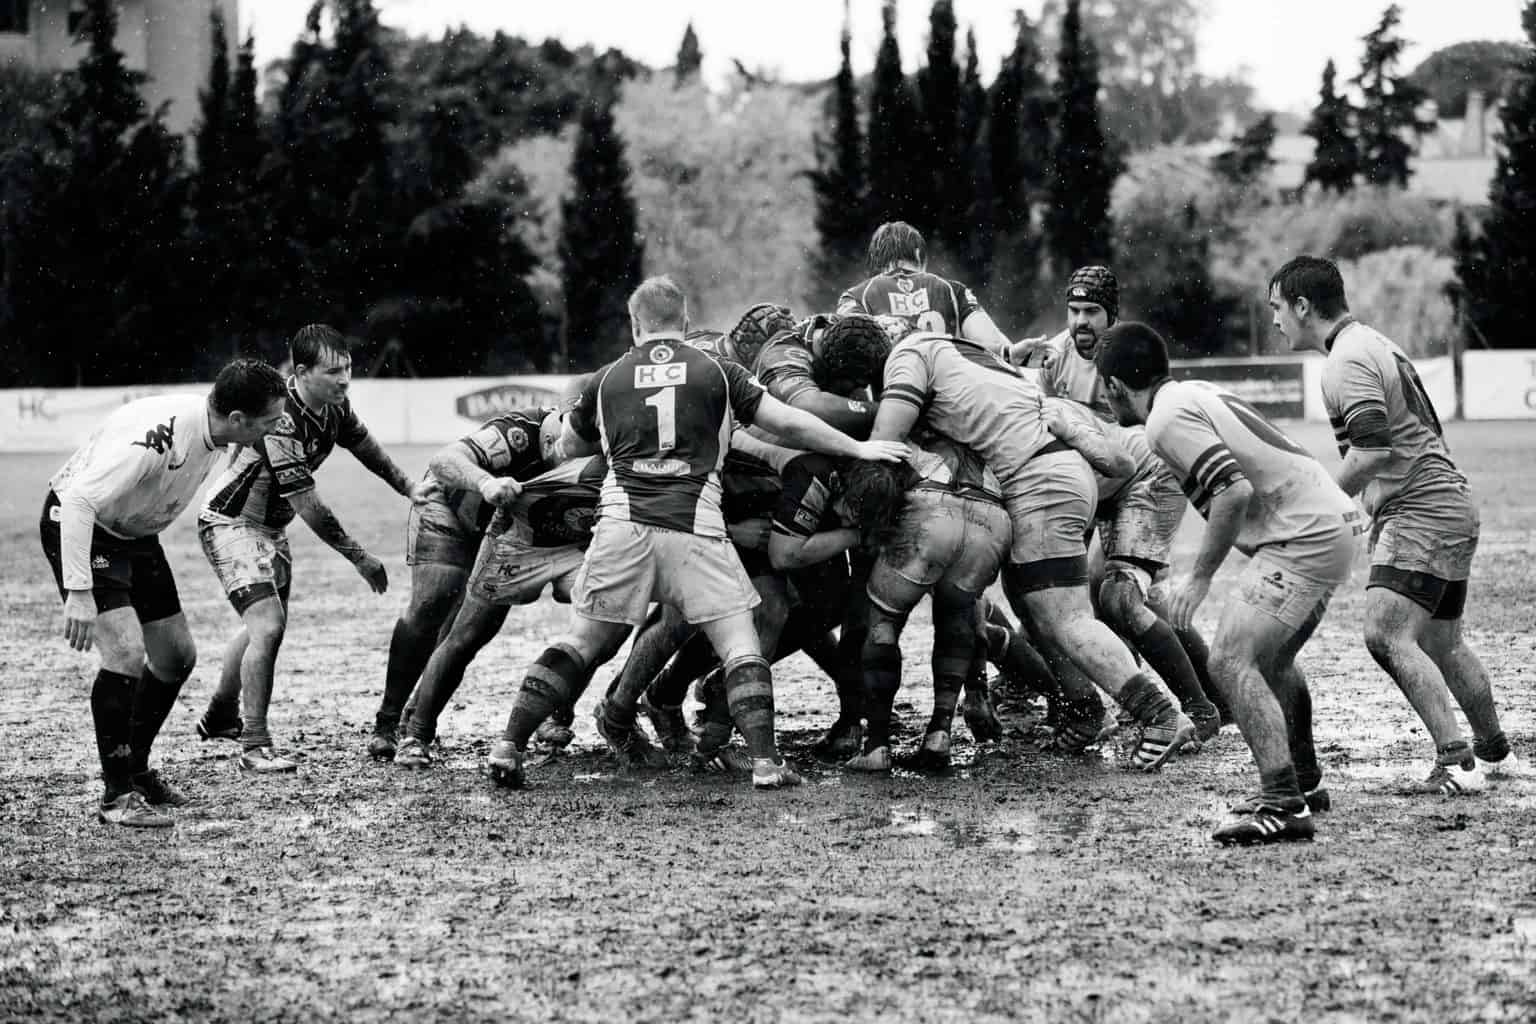 men playing rugby on muddy land